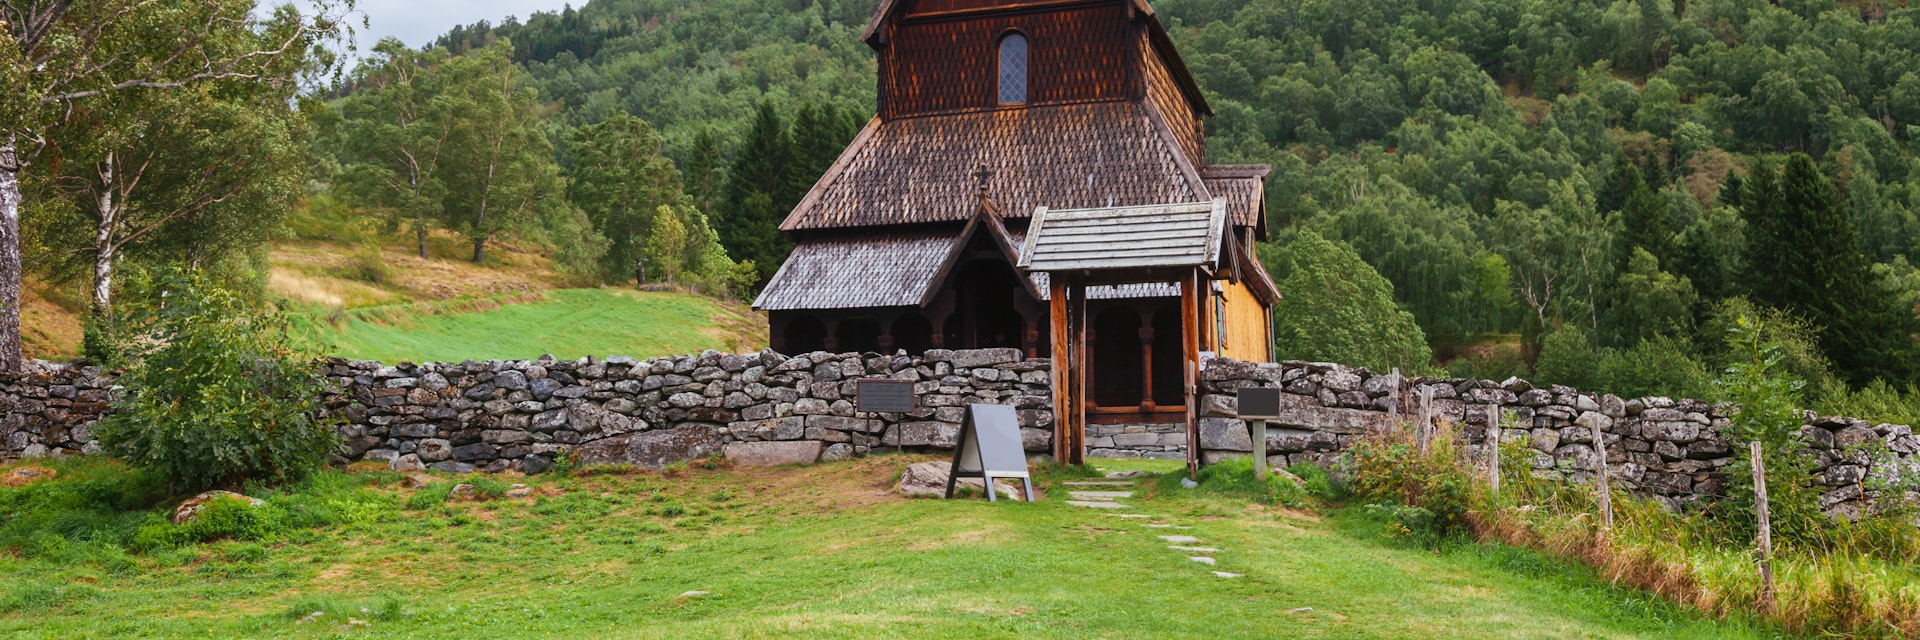 12th century wooden Romanesque Urnes Stave Church, listed as UNESCO World Heritage Site and one of the oldest stave churches in Norway. 